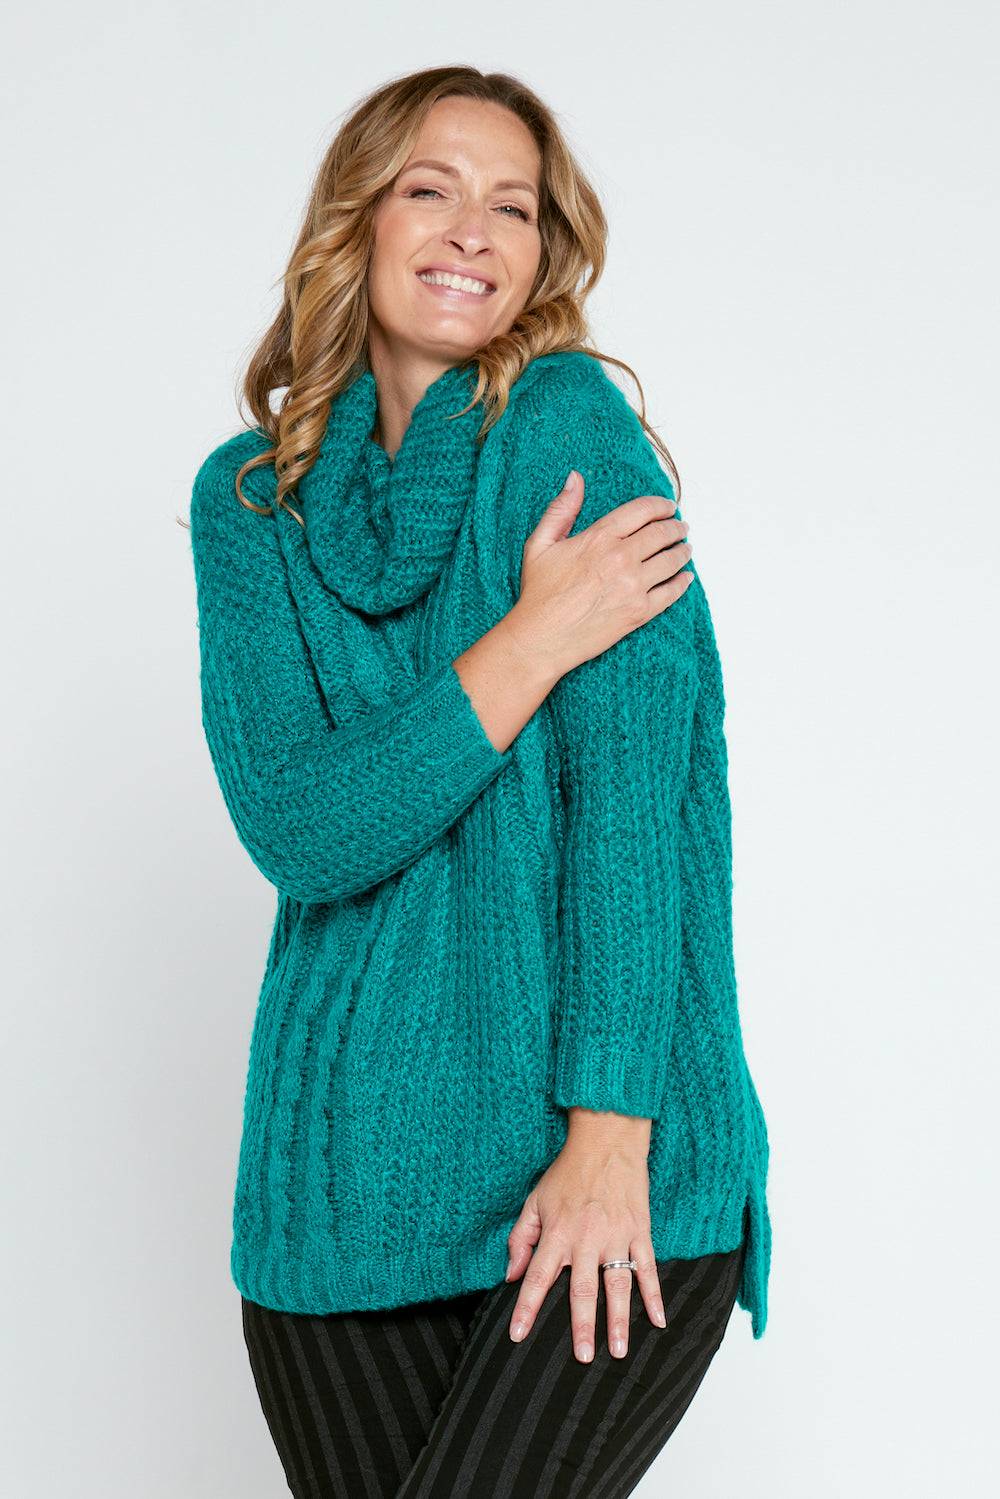 Kim Cable Cowl Knit - Teal